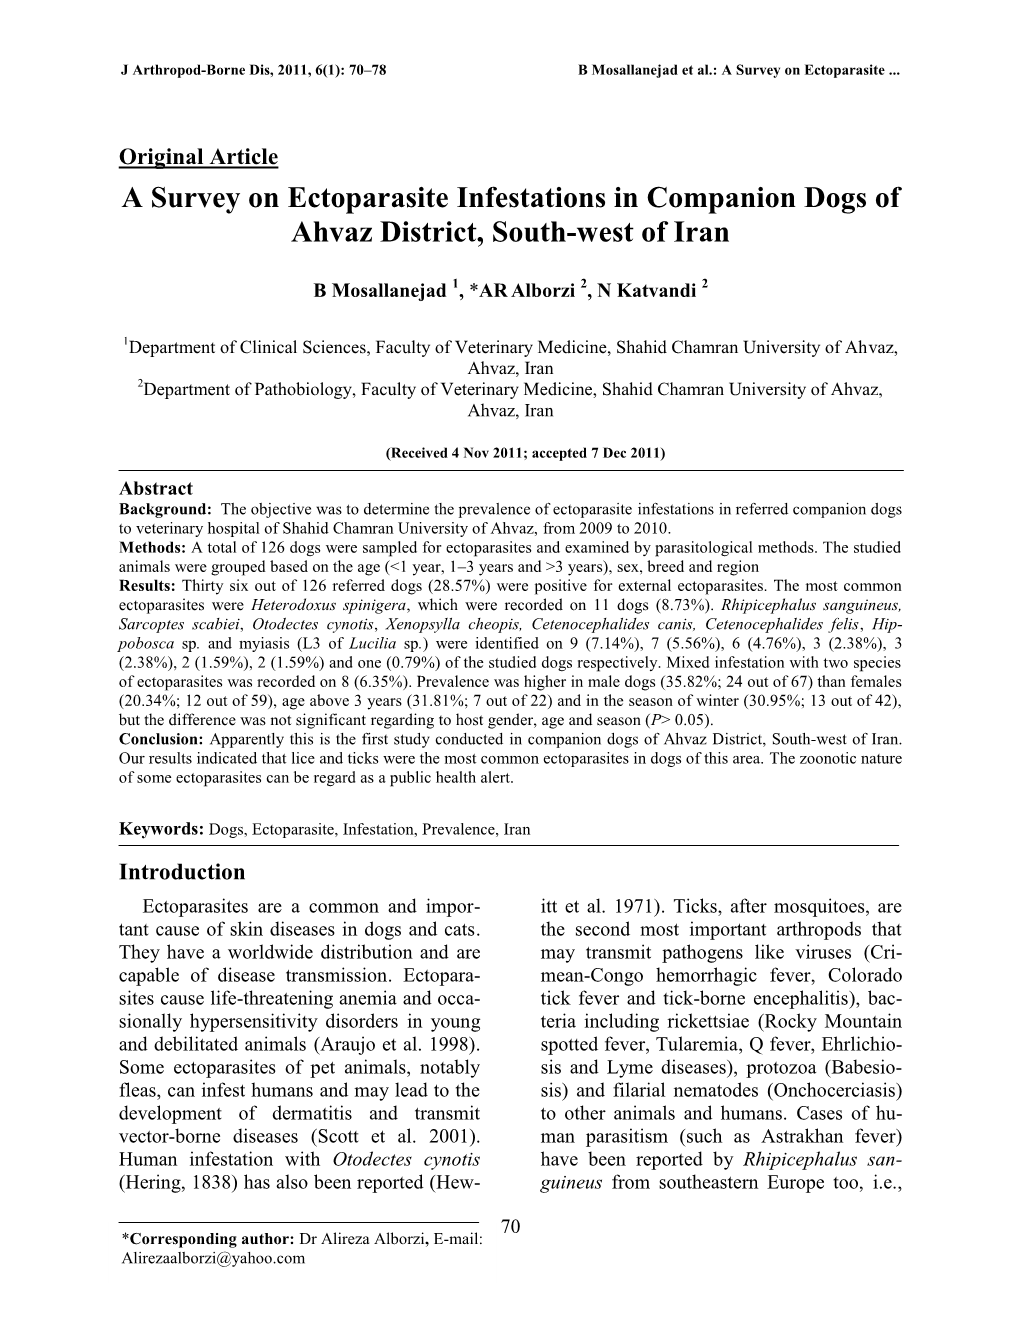 A Survey on Ectoparasite Infestations in Companion Dogs of Ahvaz District, South-West of Iran